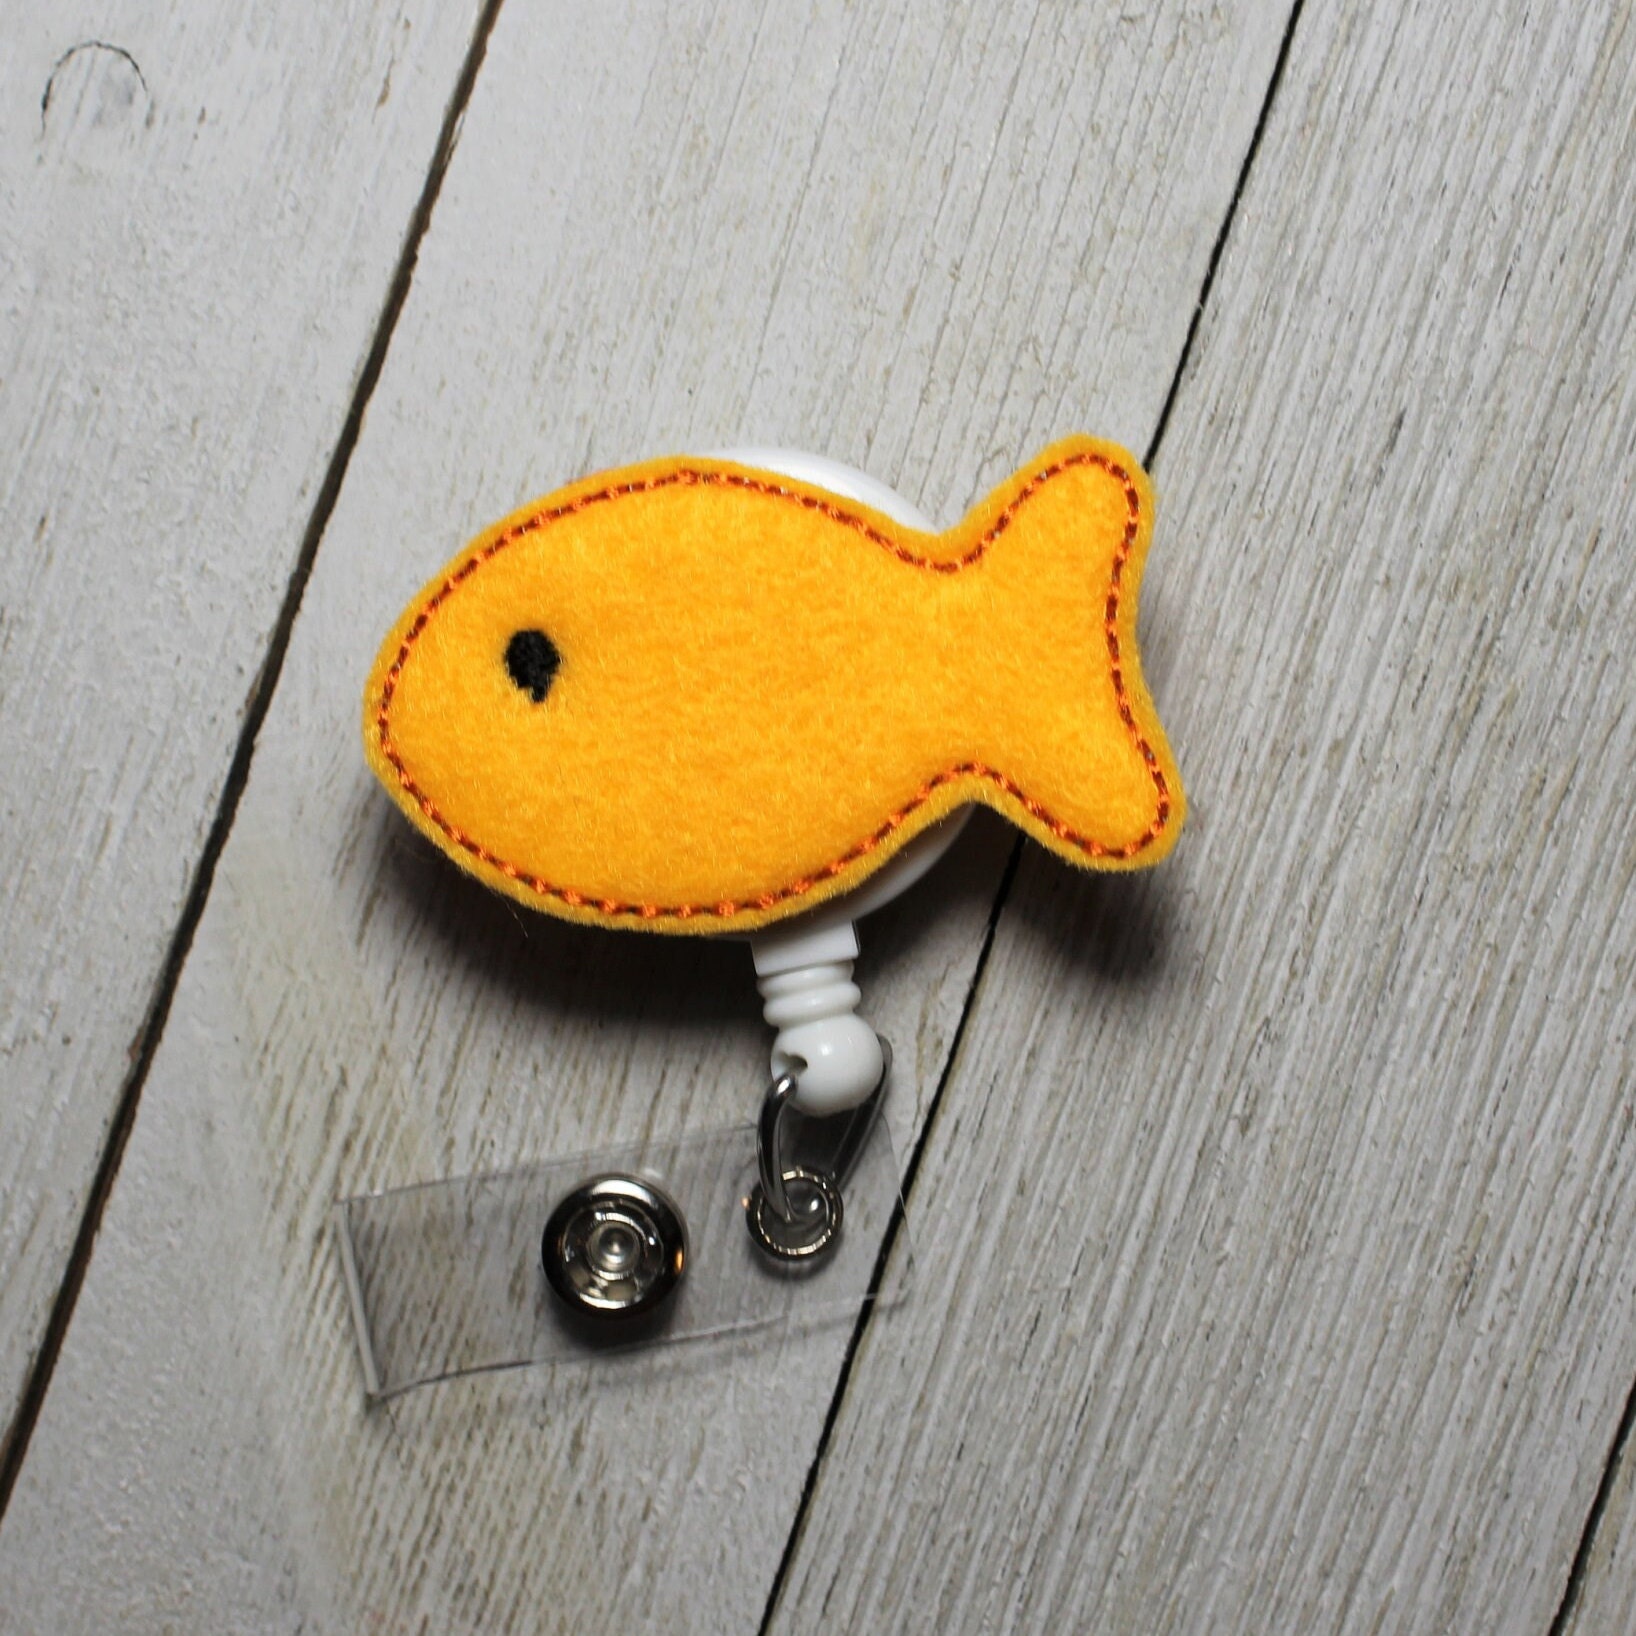  Amabro Fish Scales ID Badge Holder with Retractable